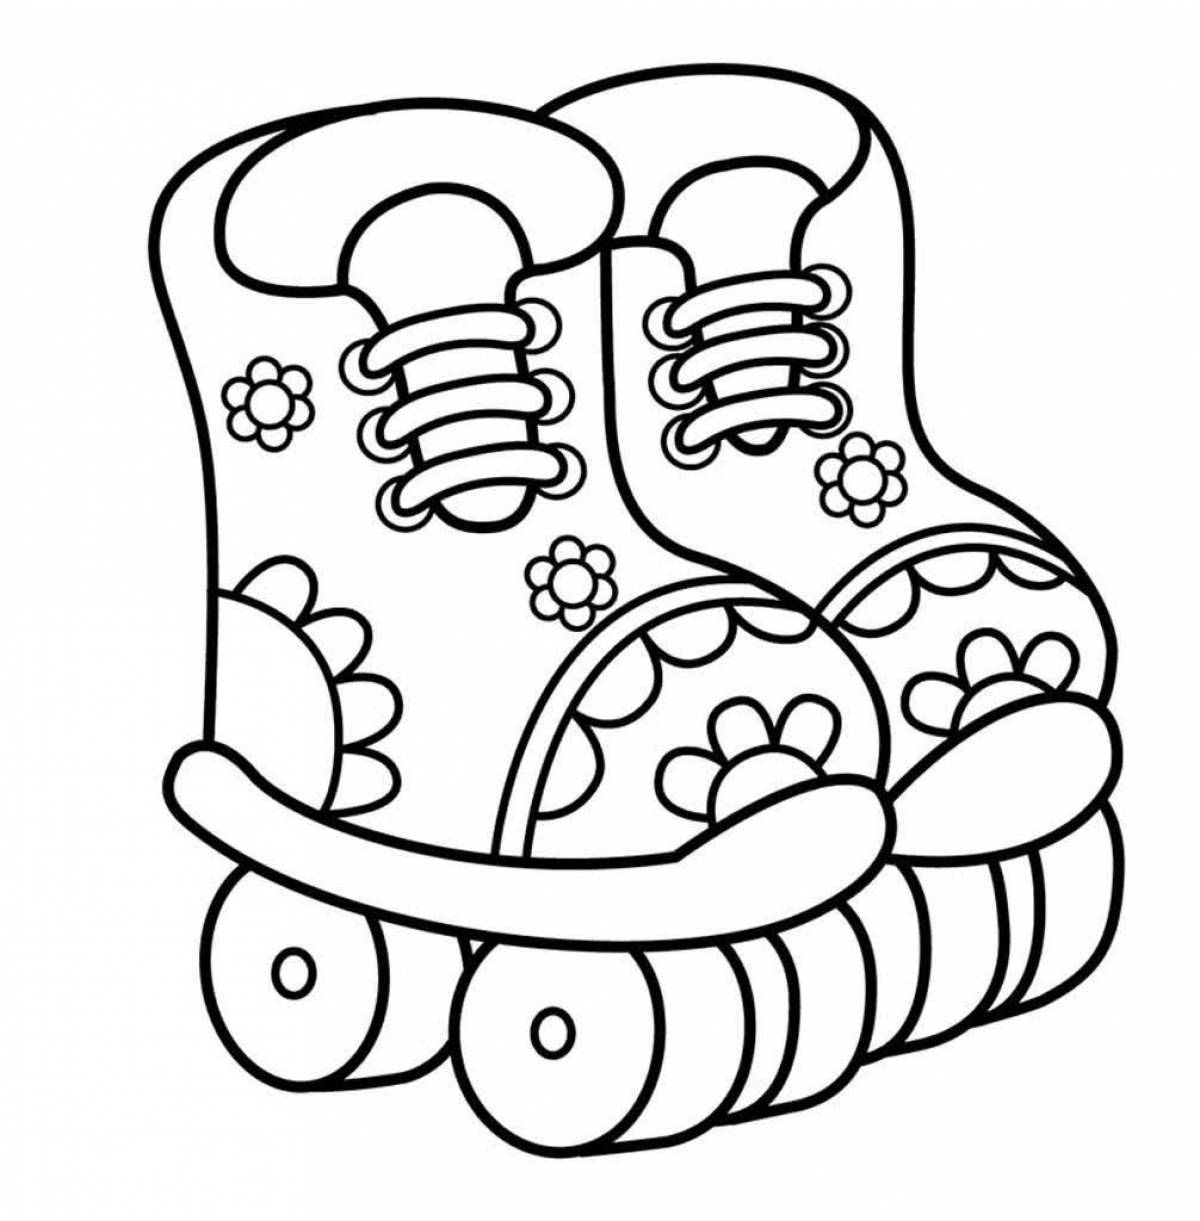 Coloring book sparkling children's shoes